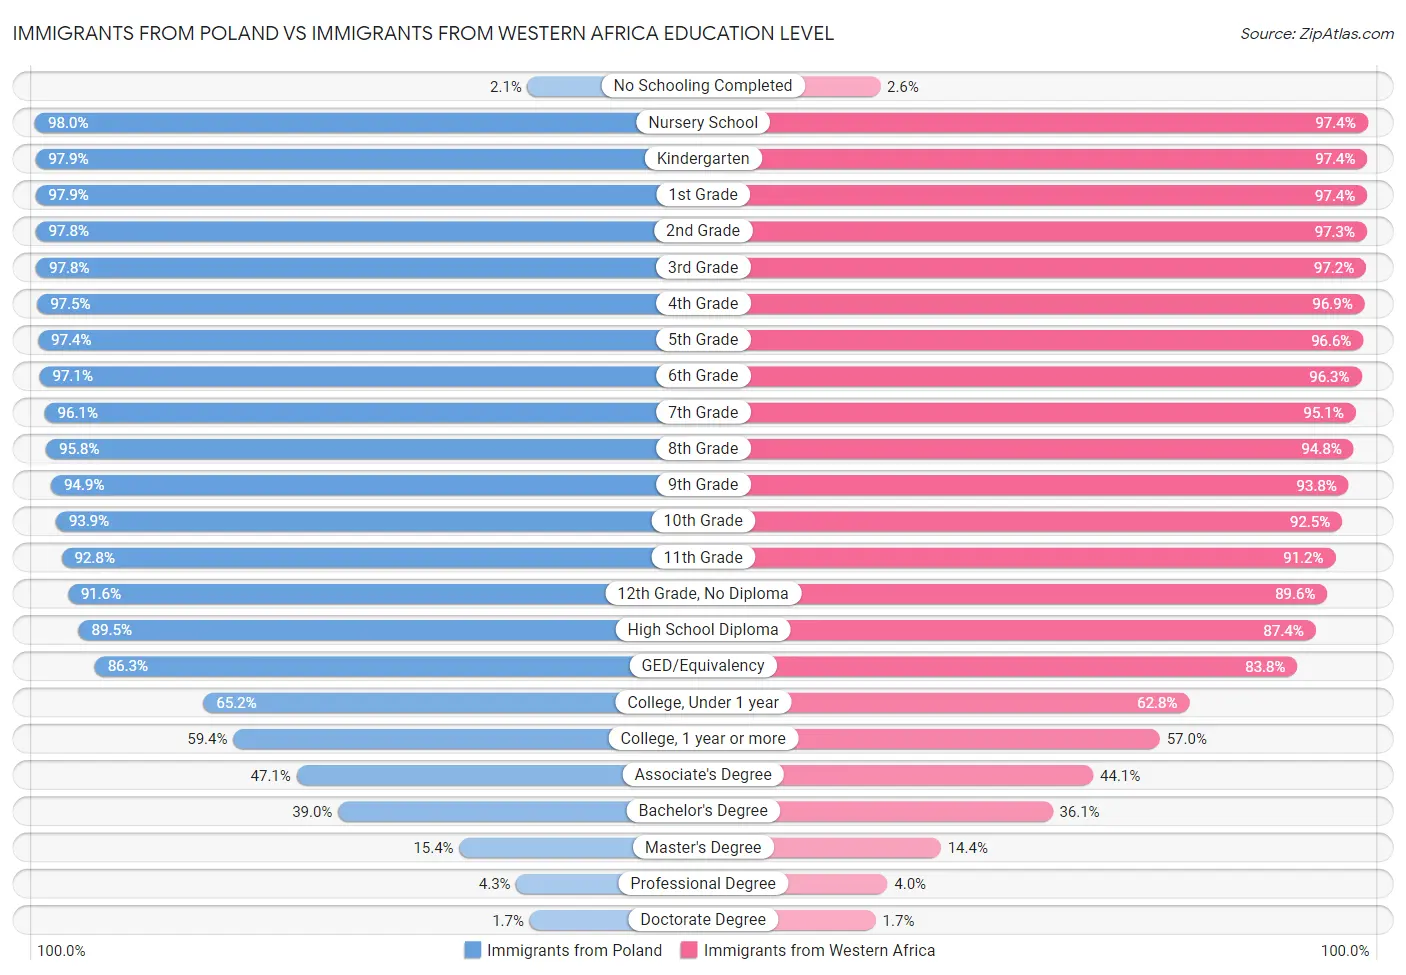 Immigrants from Poland vs Immigrants from Western Africa Education Level